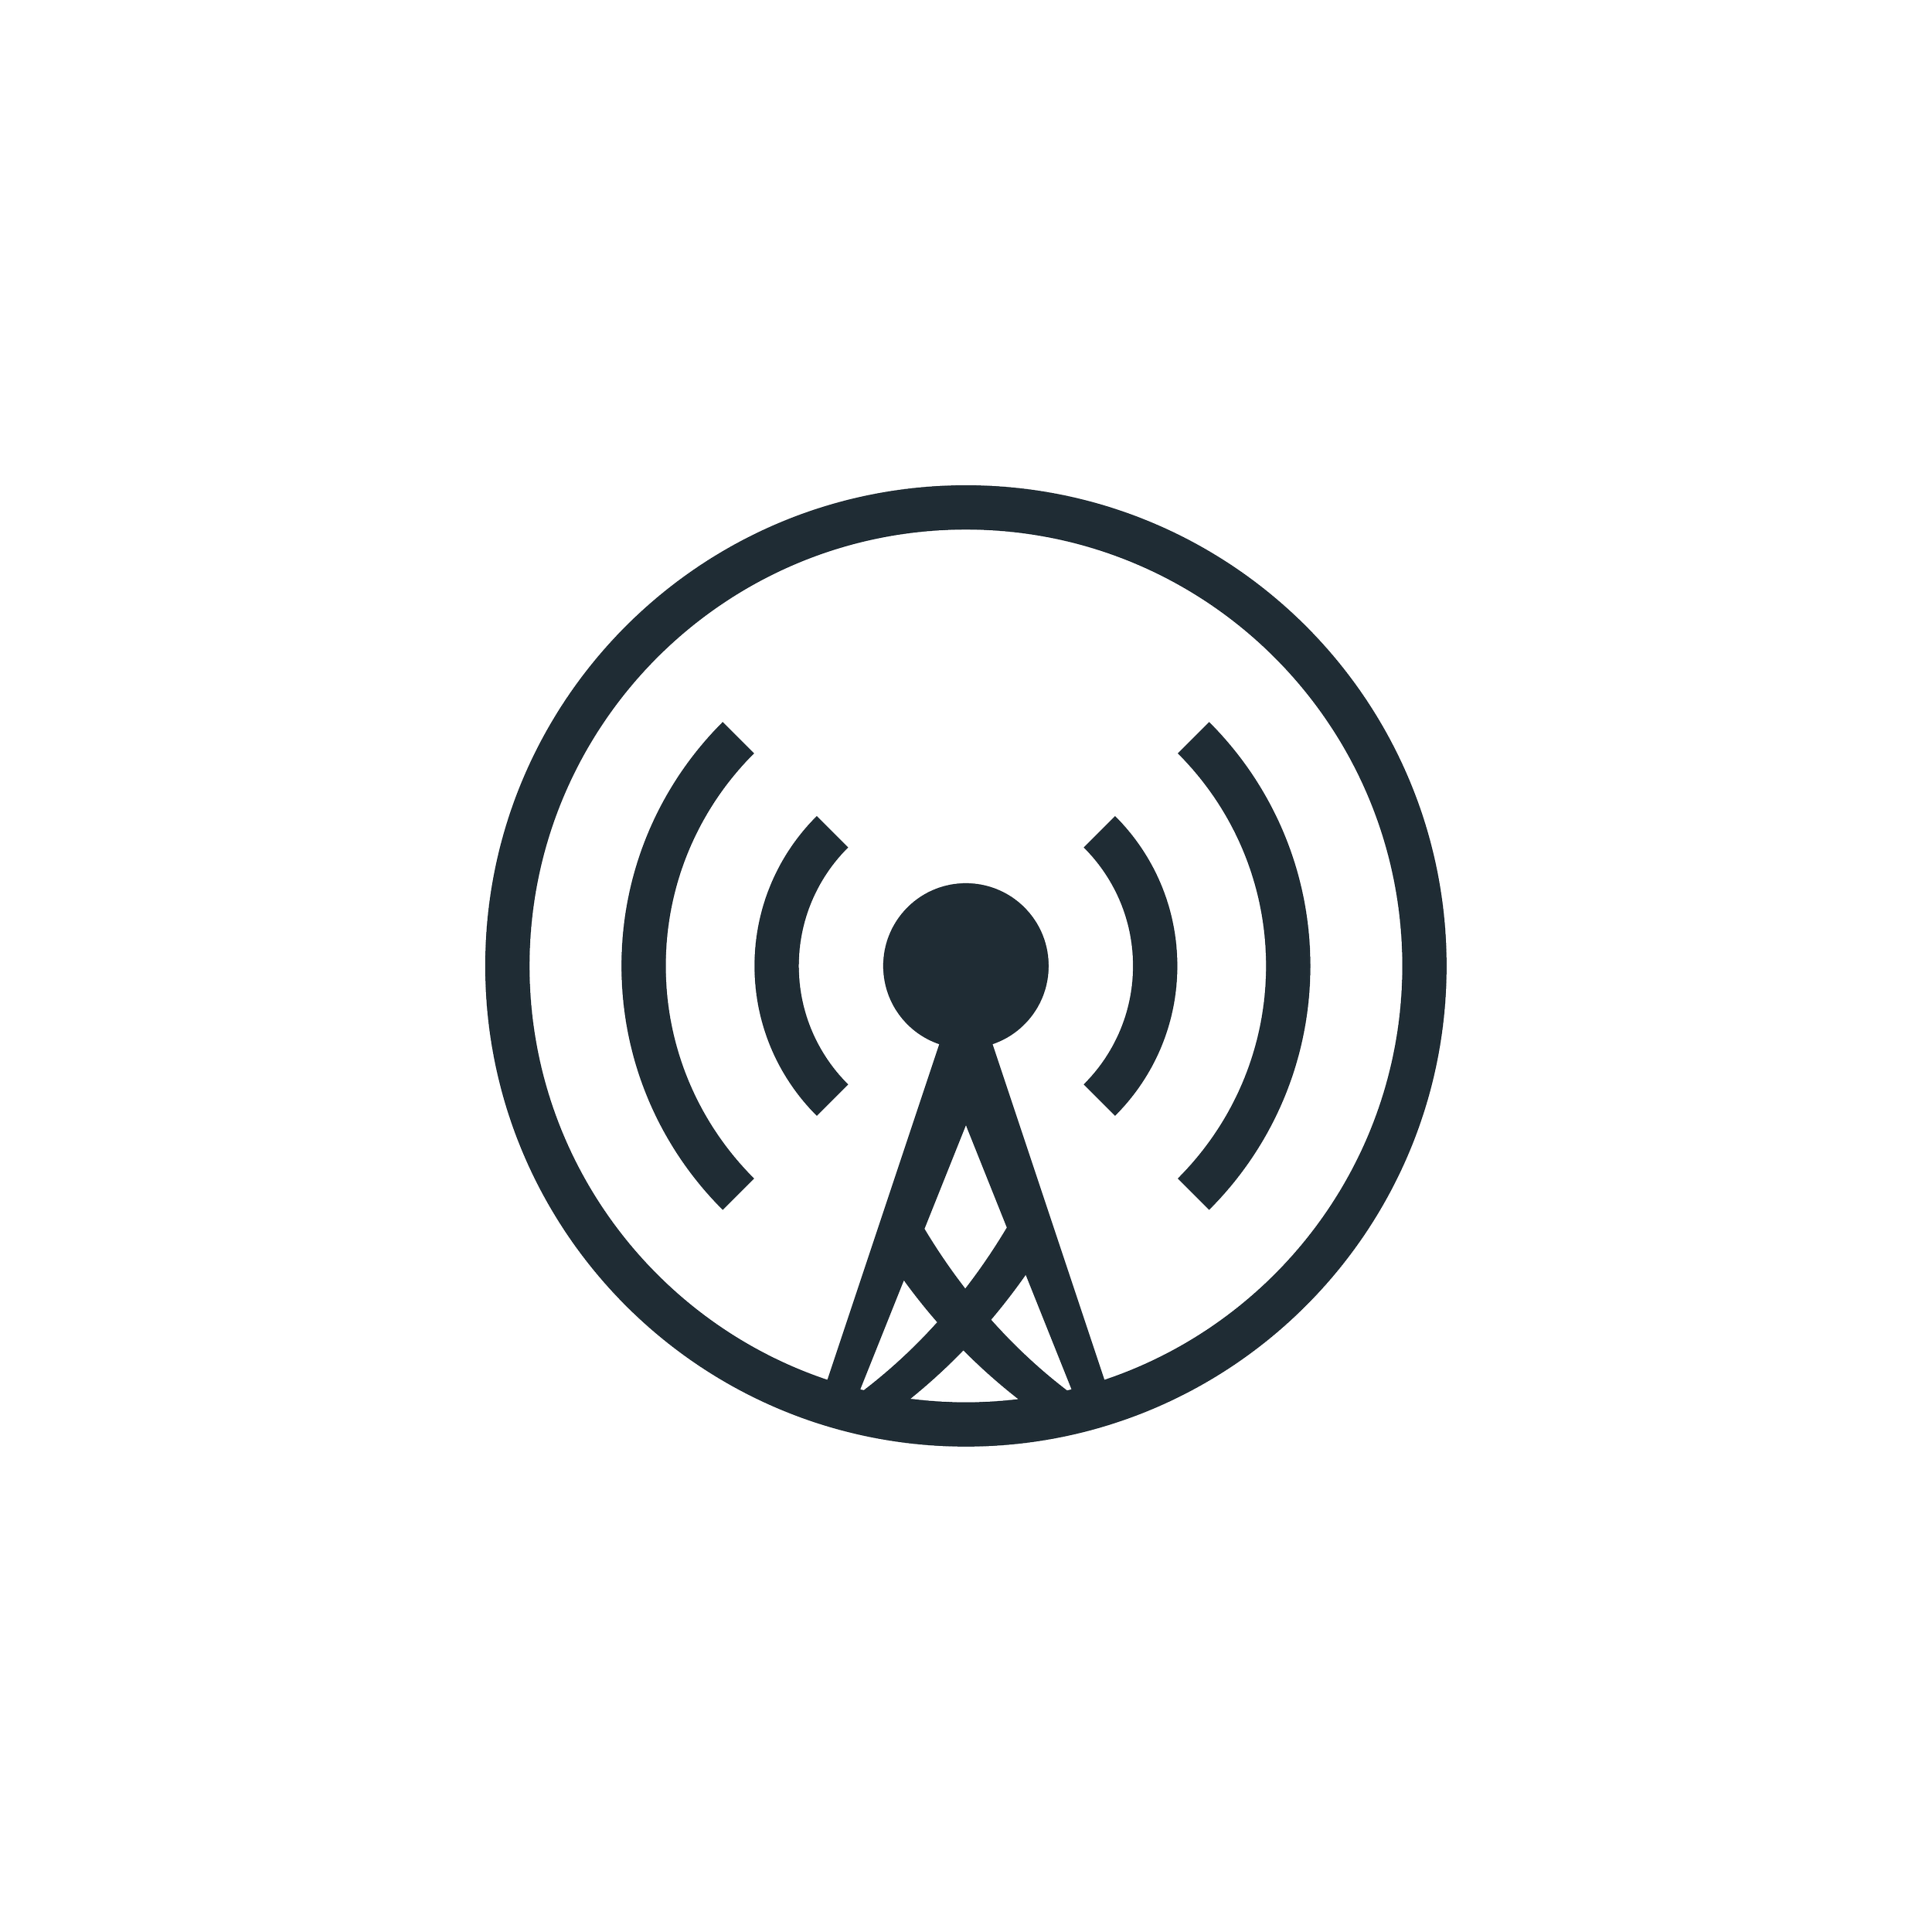 Podcast App Logos-Navy-07.png